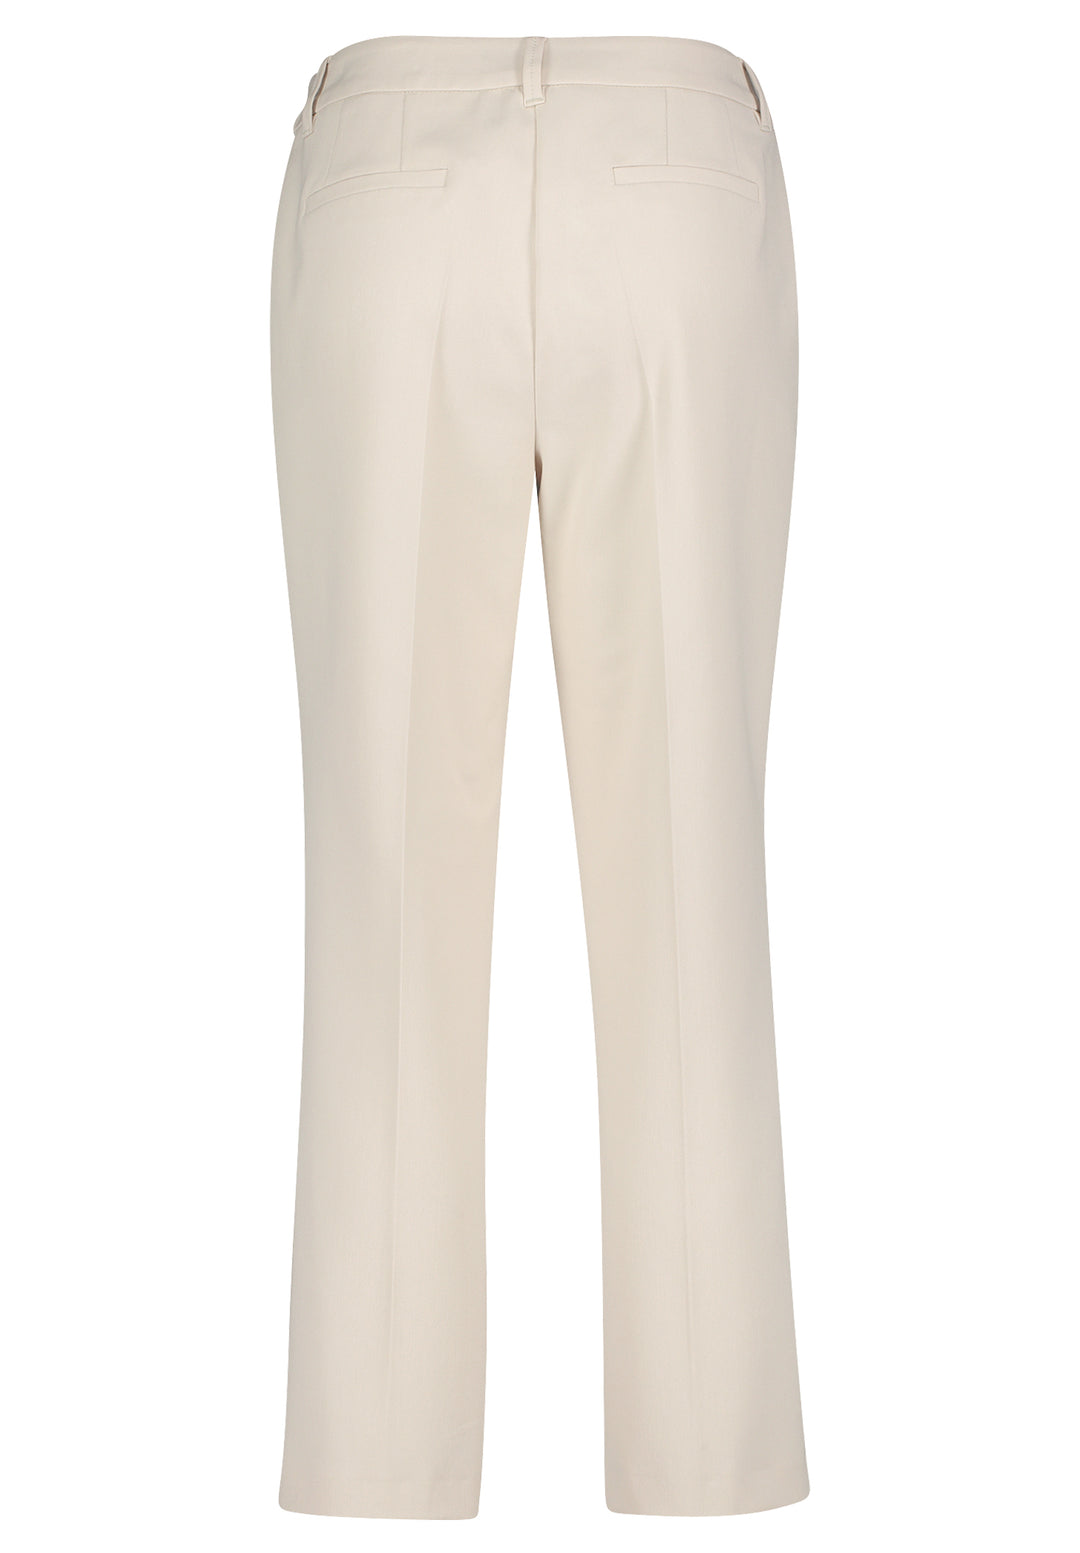 Betty Barclay 6704 1080 9104 Classic 3/4 Trouser Sand 5